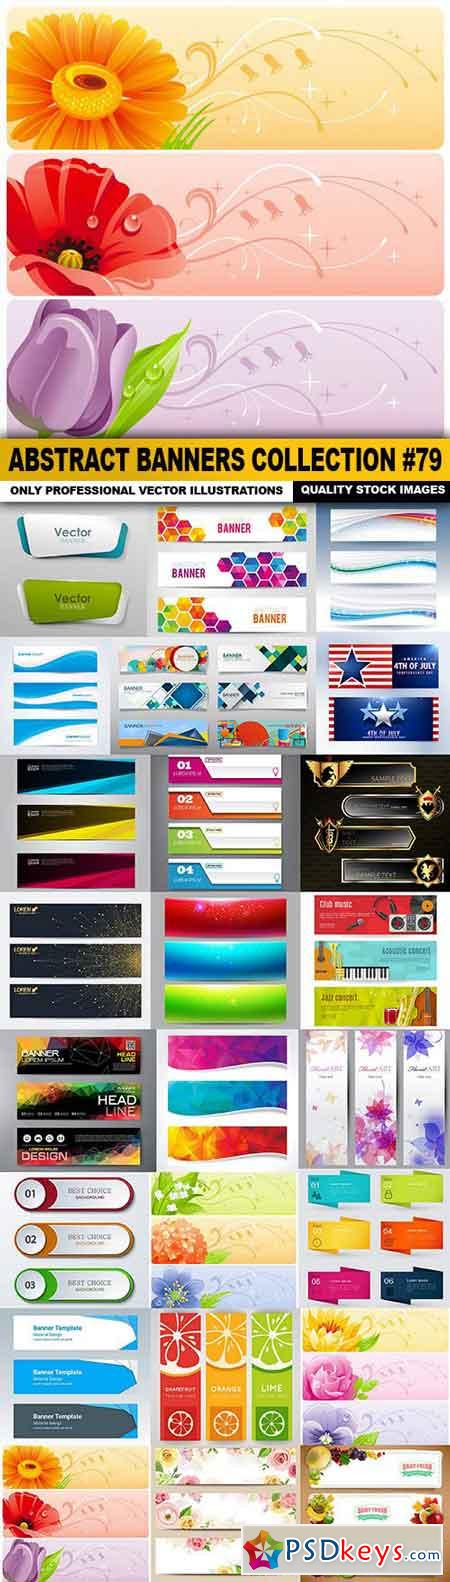 Abstract Banners Collection #79 - 25 Vectors